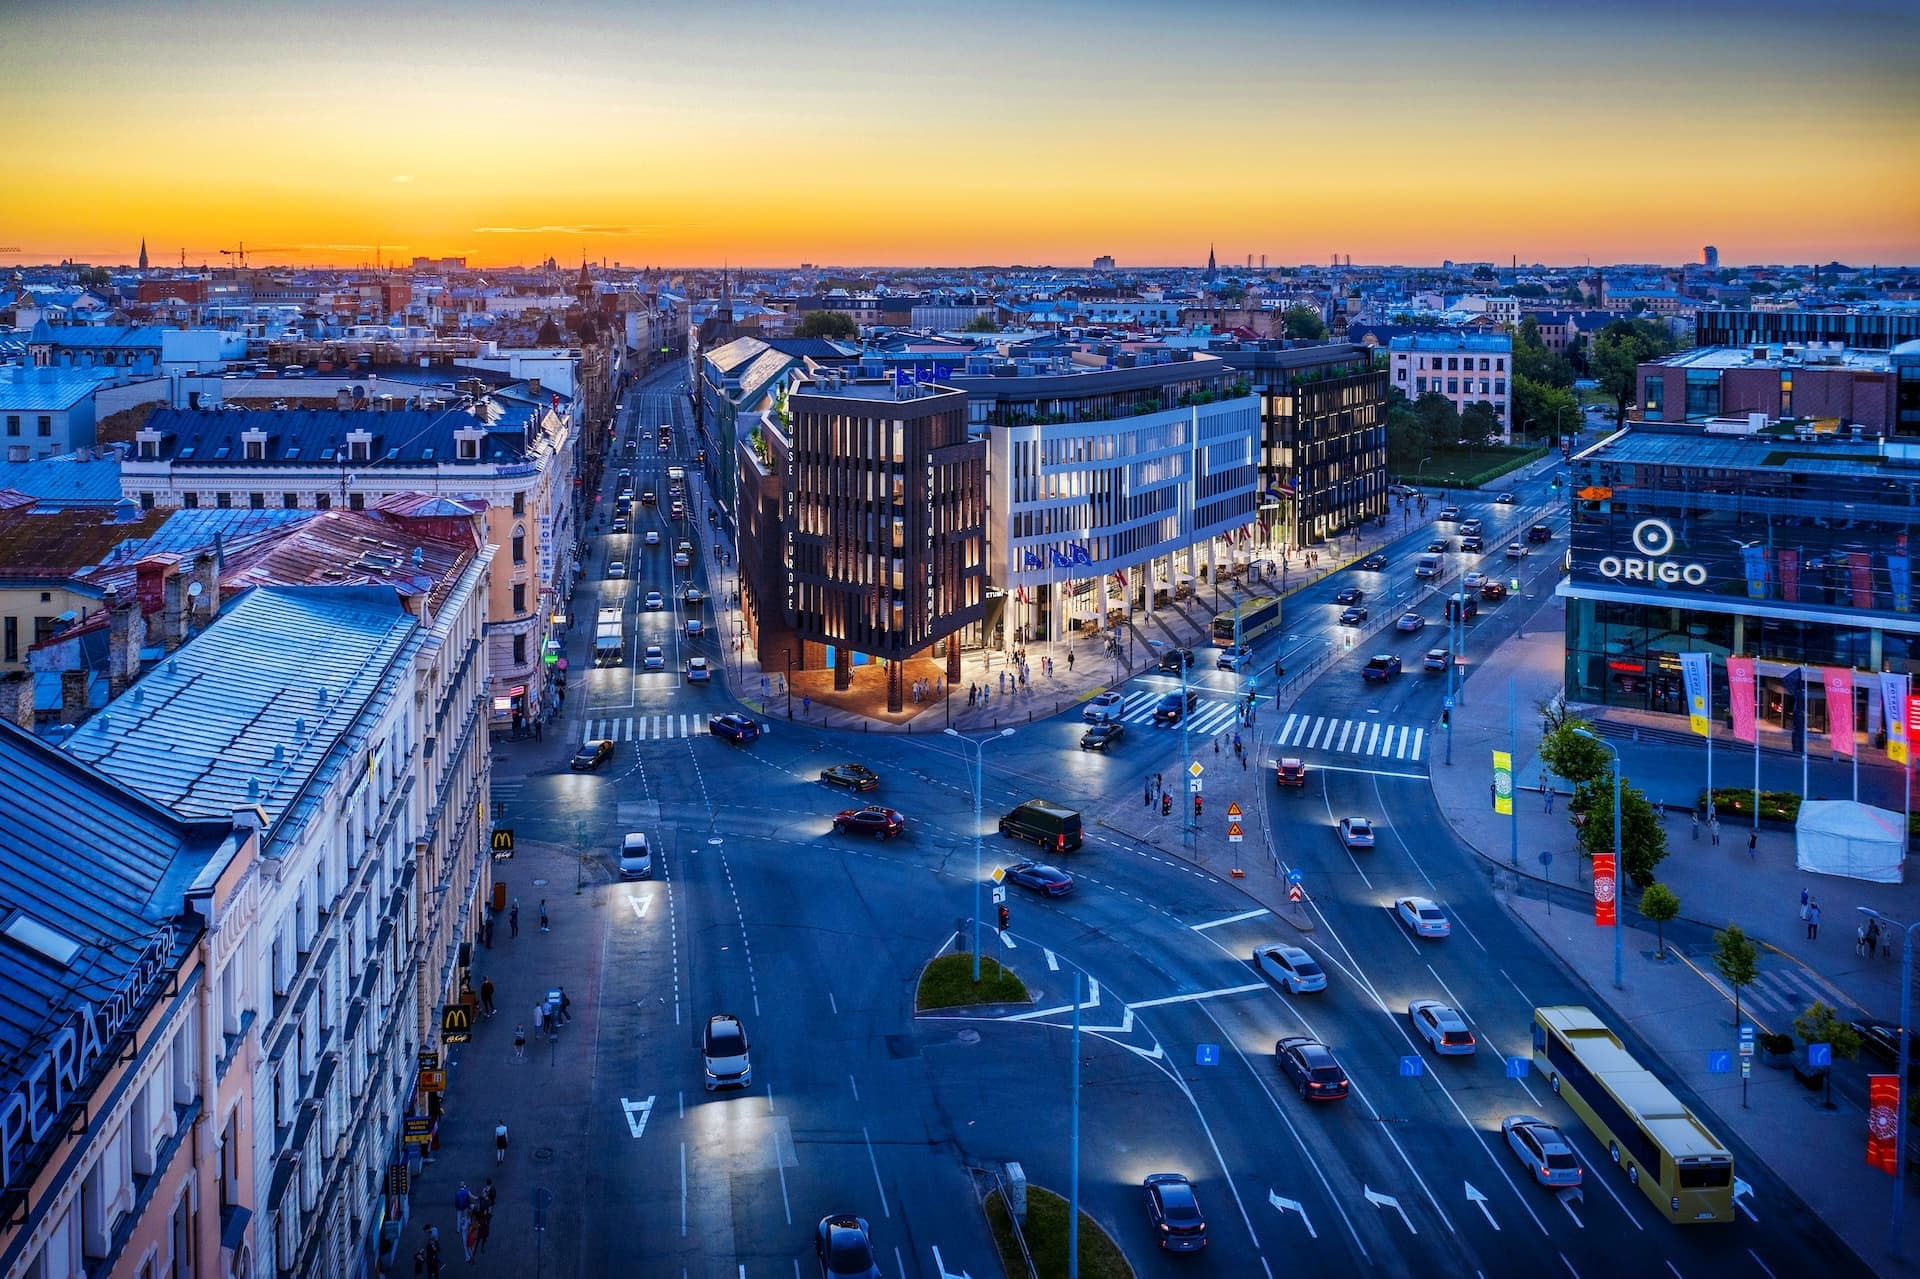 Newsec will relocate their Riga office to Novira Plaza and become property manager of the business centre